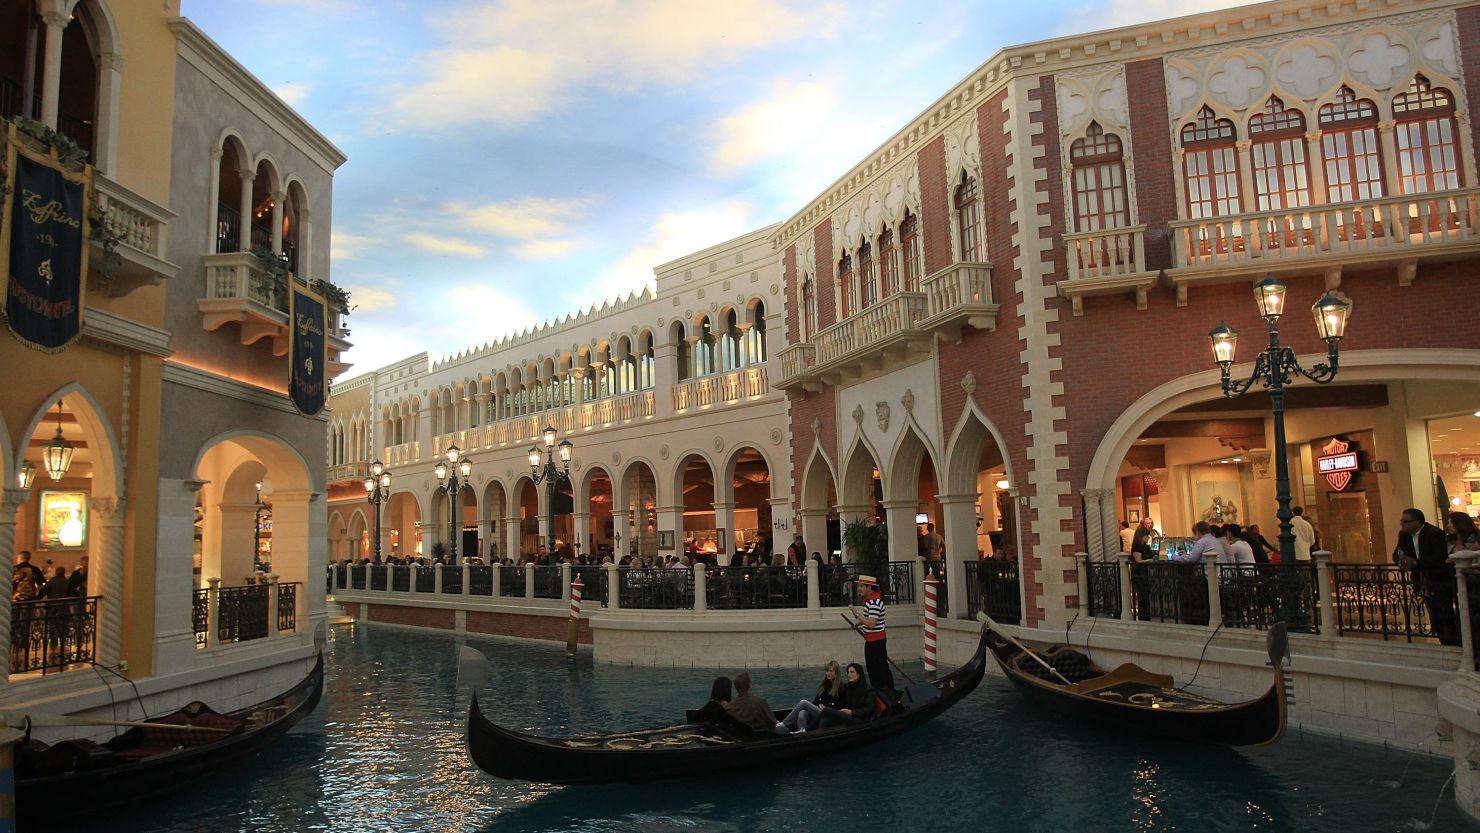 The company that owns the Venetian in Las Vegas, pictured here, is planning to open a casino-hotel resort in Madrid.